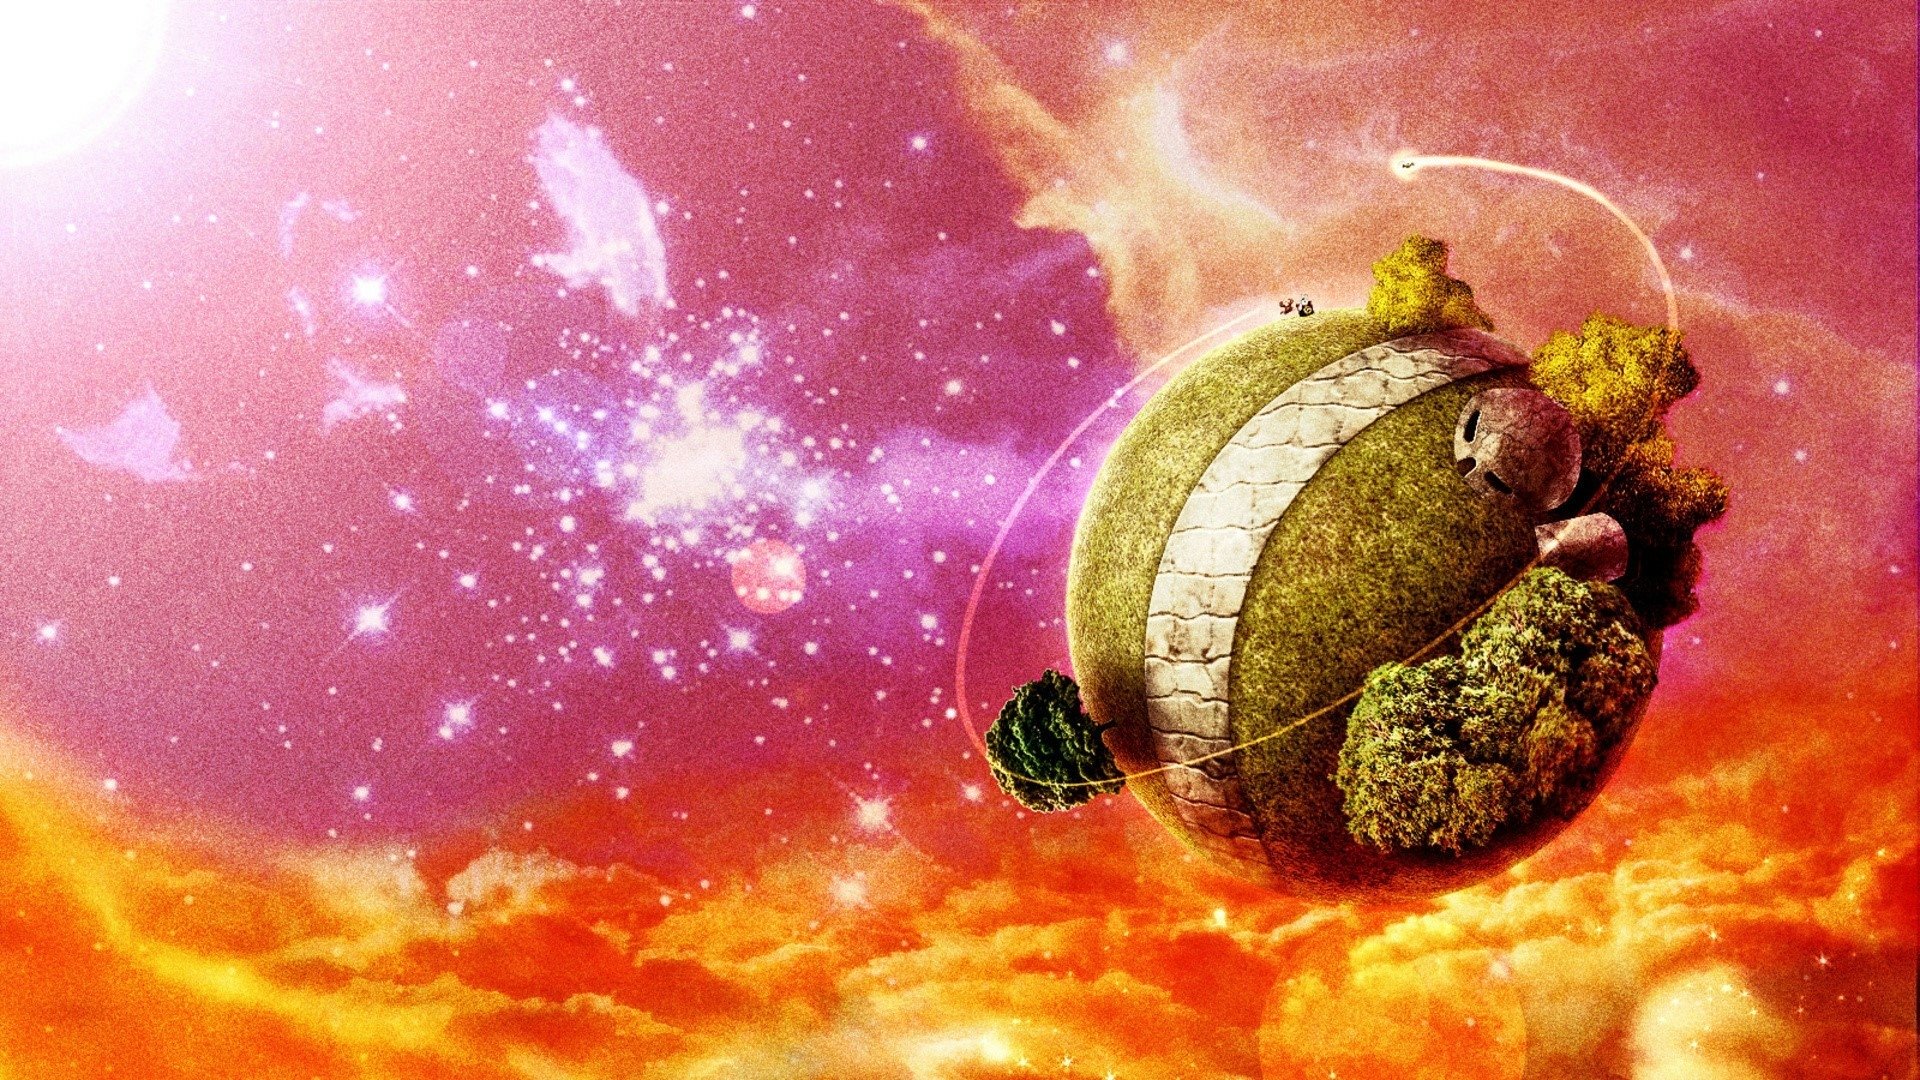 Kaio's planet Full HD Wallpaper and Background Image ...